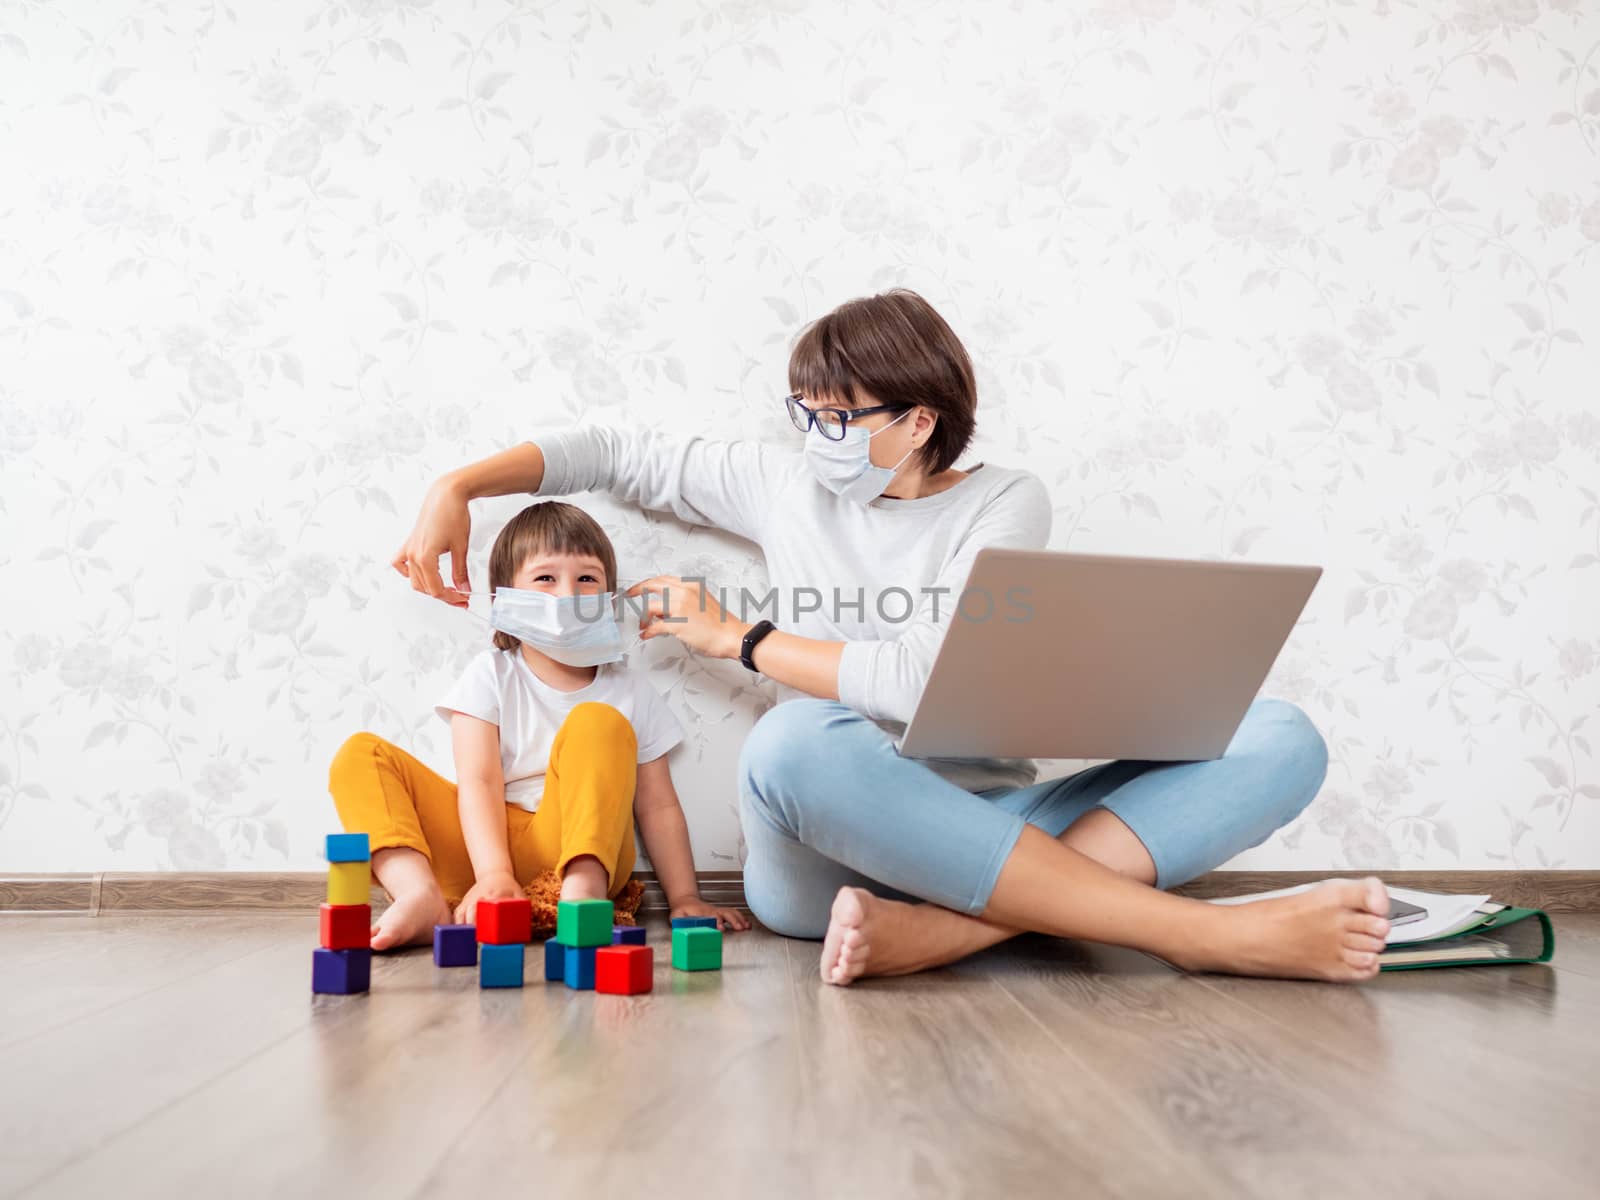 Mom and son at home quarantine because of coronavirus COVID19. Mother works remotely with laptop, son plays with toy blocks. Self isolation at home.